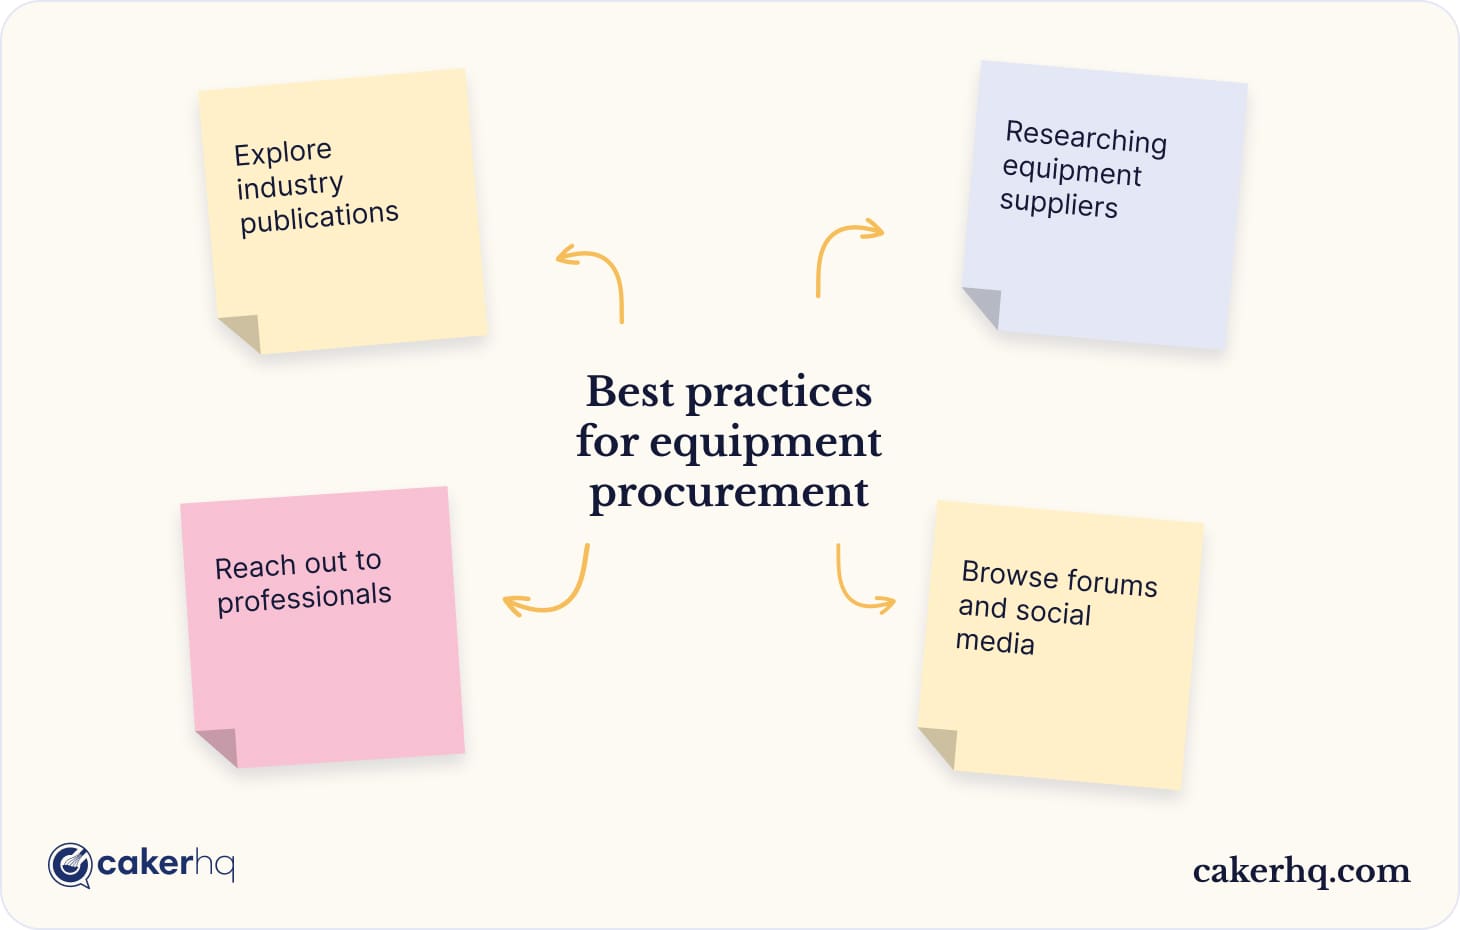 How to start researching equipment suppliers